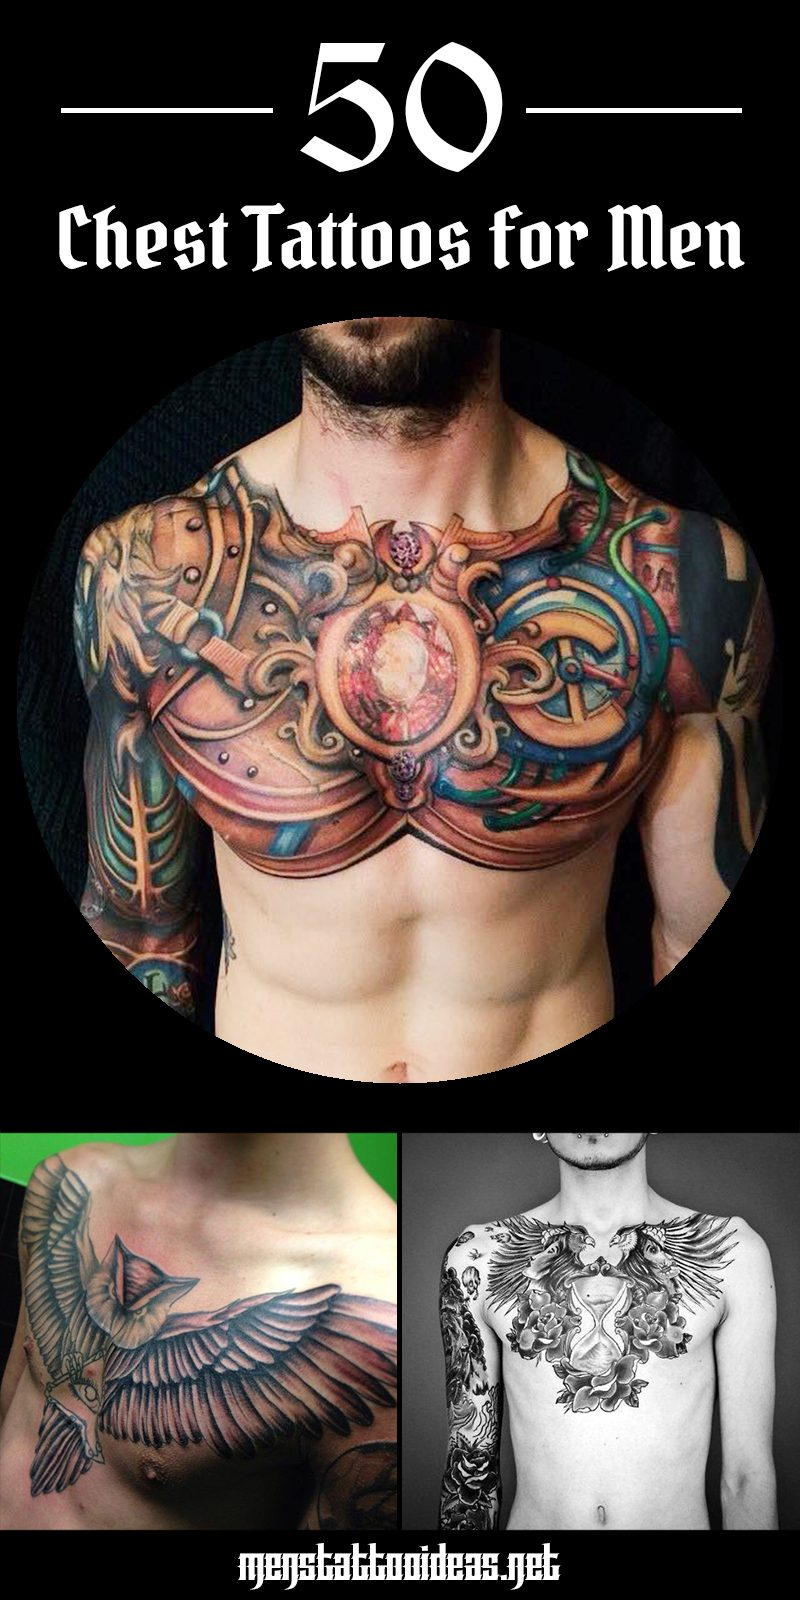 Chest Tattoos For Men Mens Tattoo Ideas in size 800 X 1600